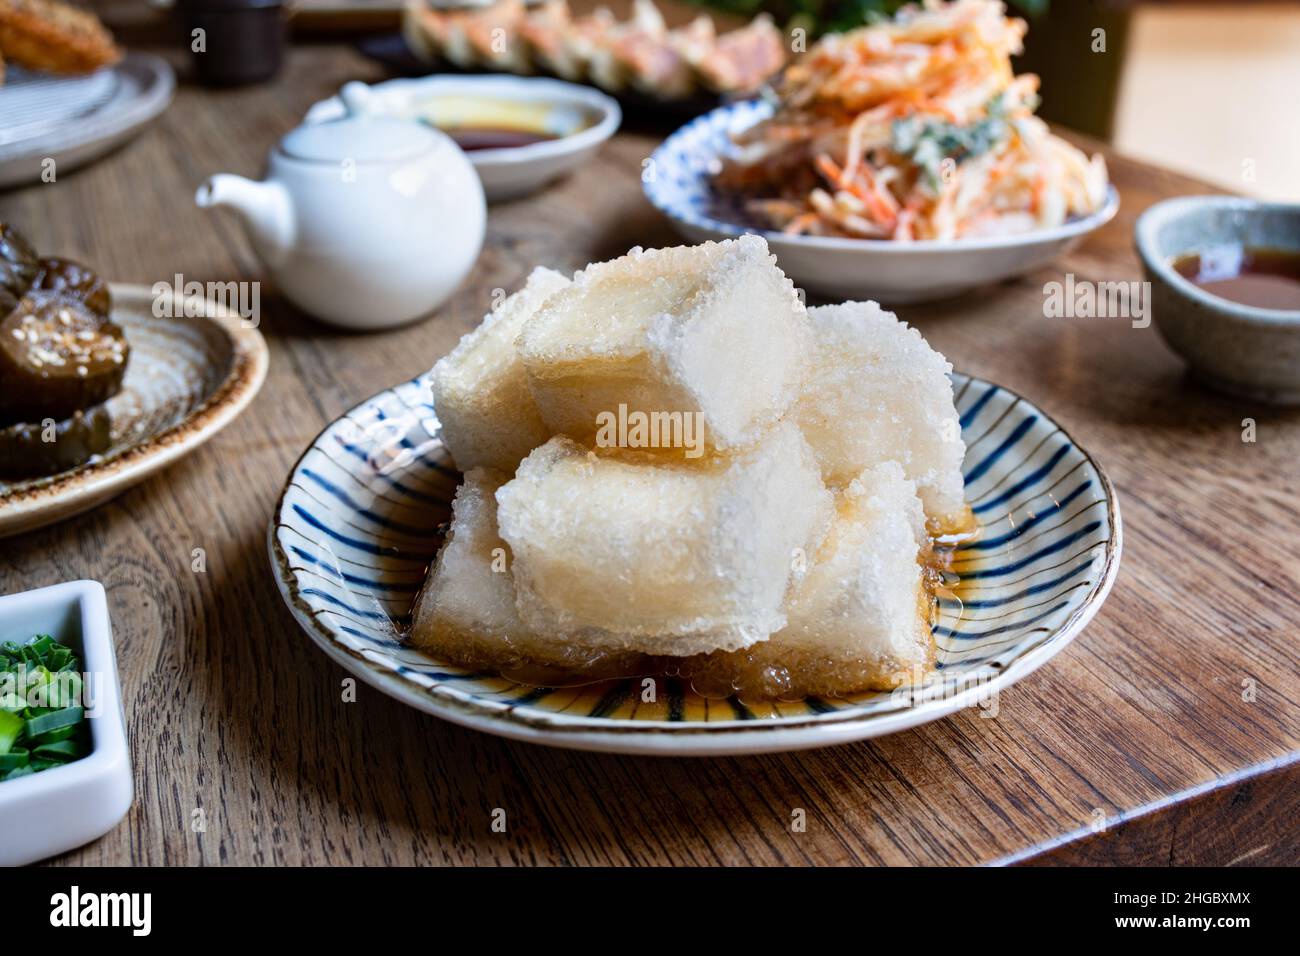 Agedashi tofu, a Japanese traditional dish, with various Japanese dishes in the background. Stock Photo